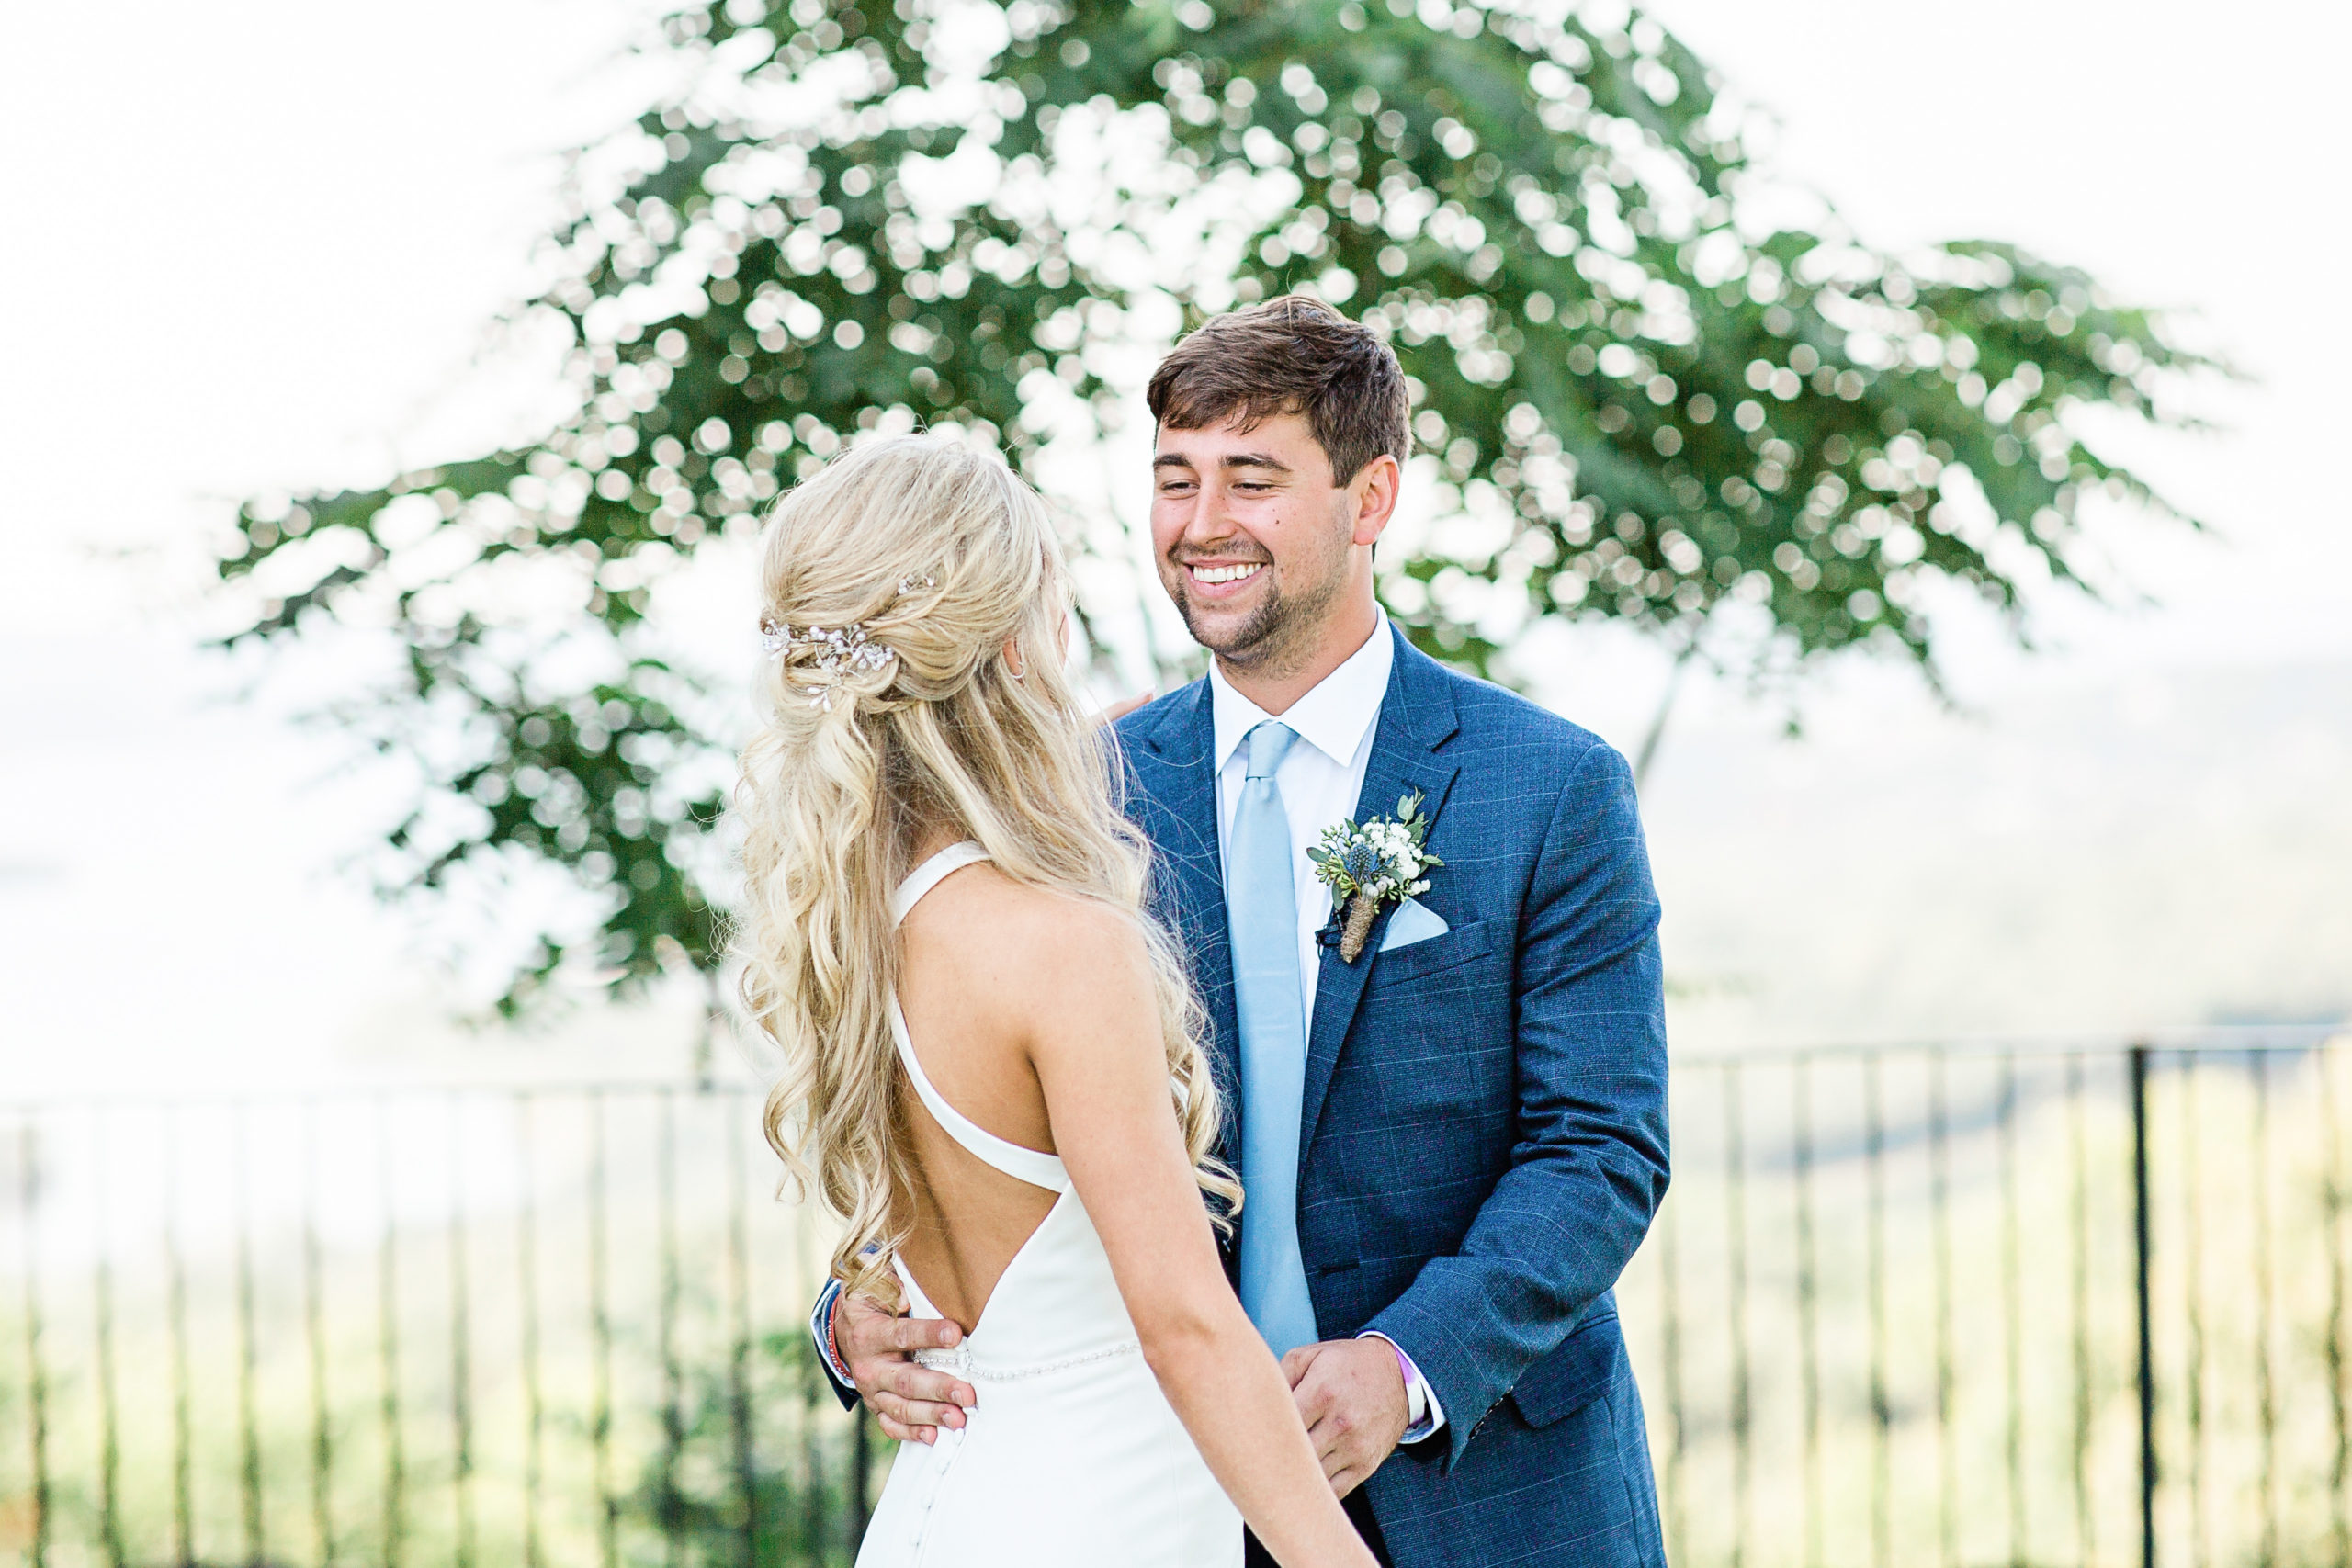 Groom turns around to see his bride for the first time, emotional first look moment. 